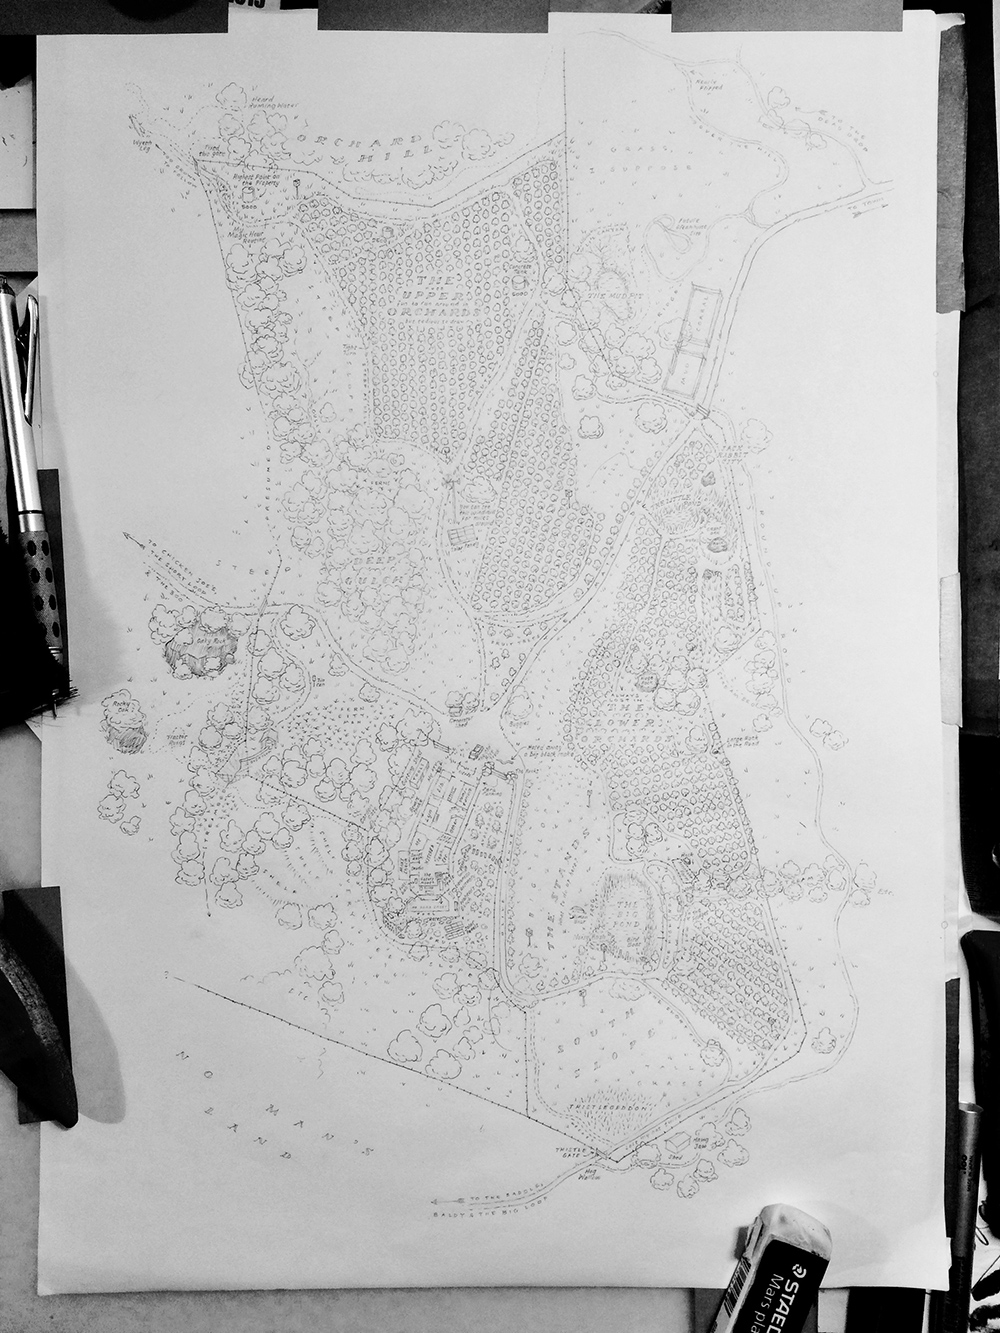 The House & Orchards (pencil rough)